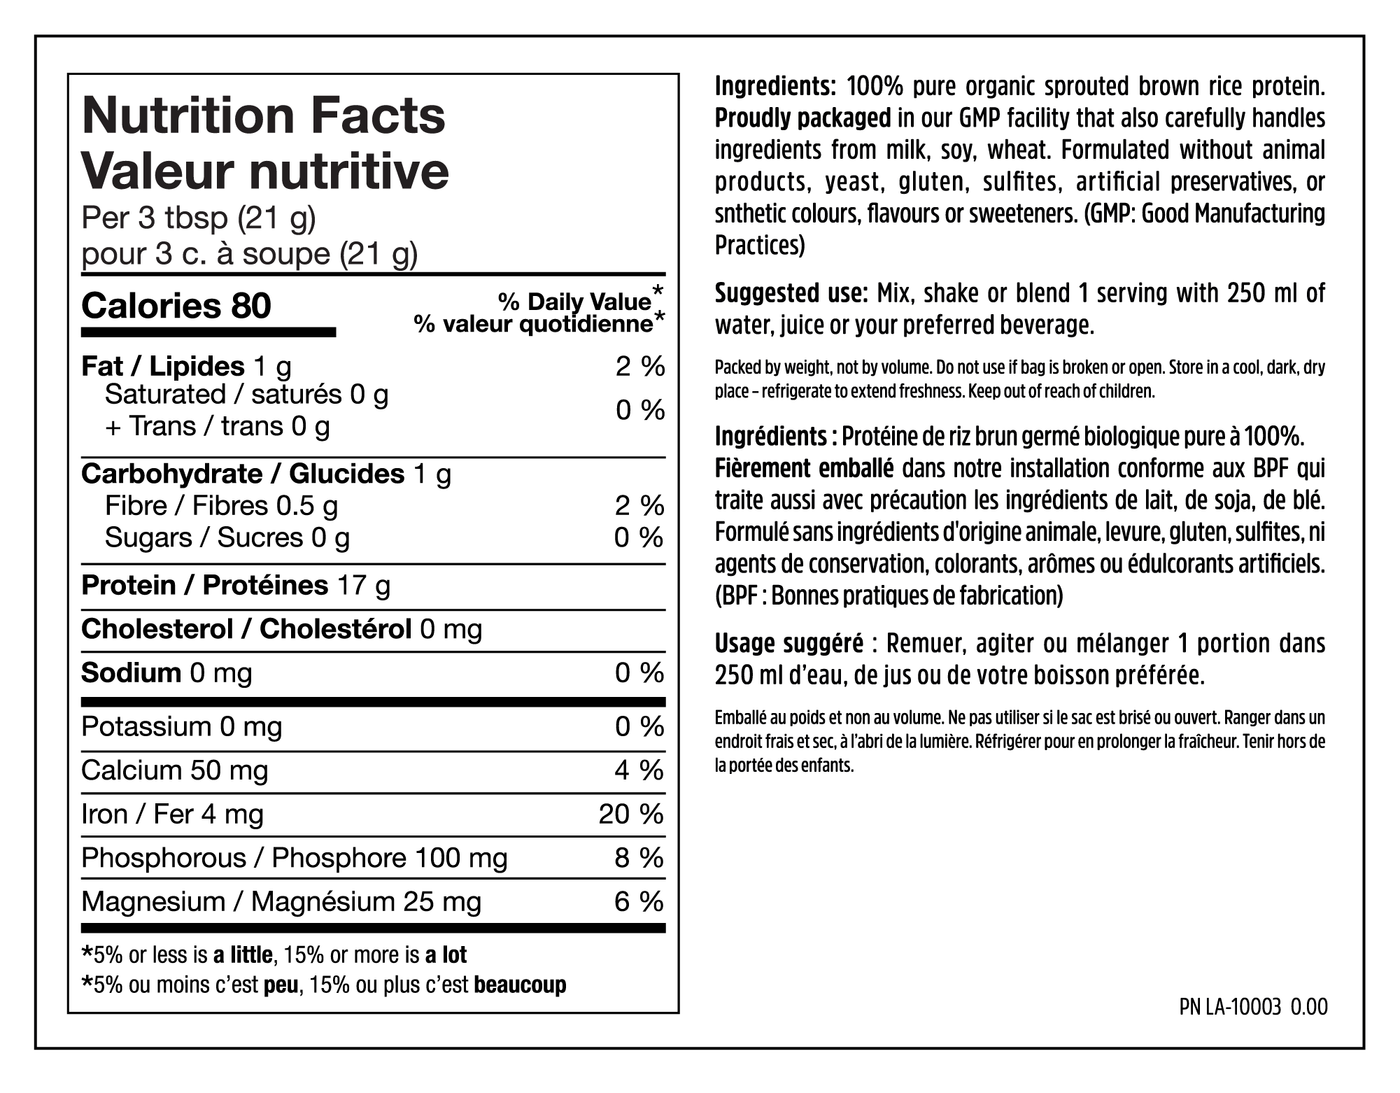 Organic Sprouted Raw Brown Rice Protein - Nutrition Facts